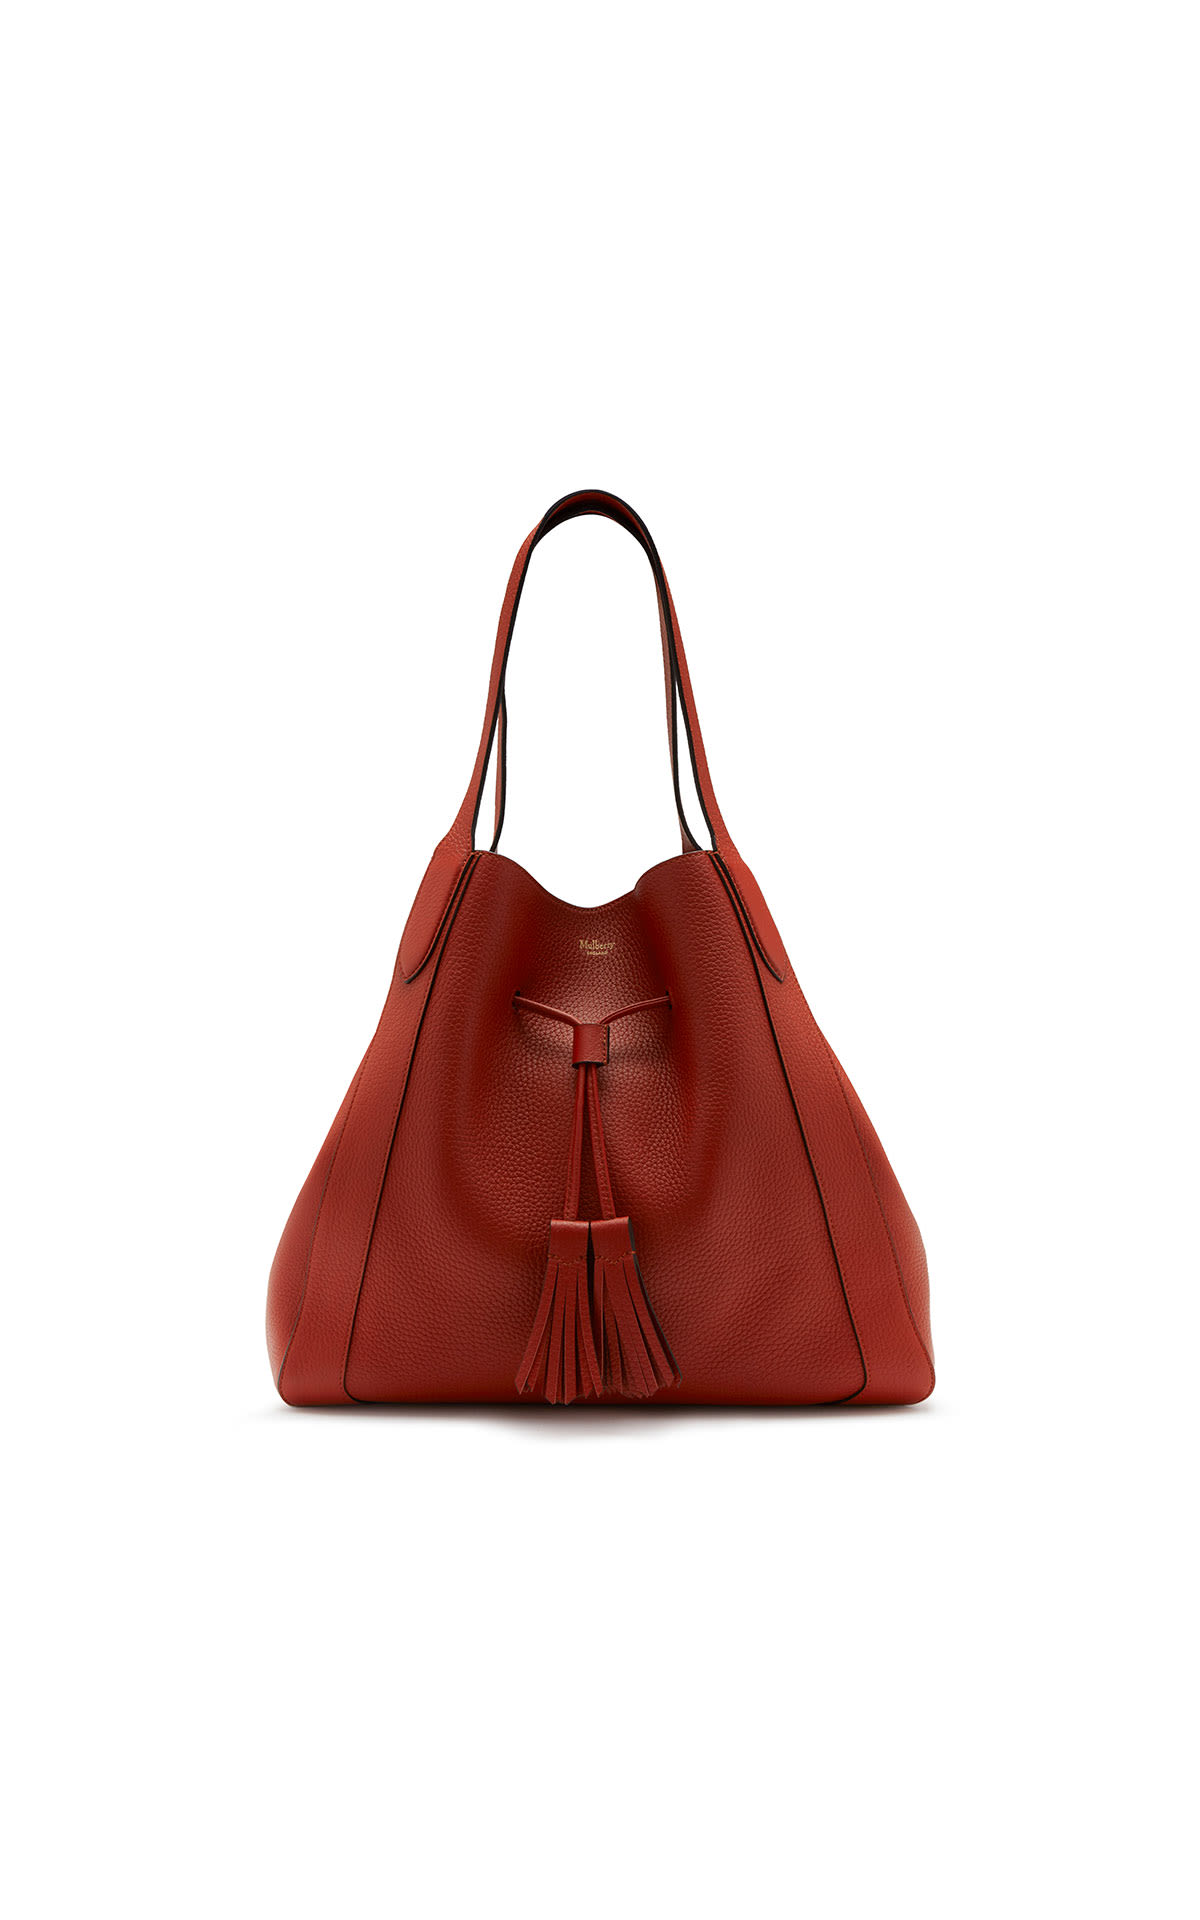 Mulberry Millie tote heavy grain  from Bicester Village